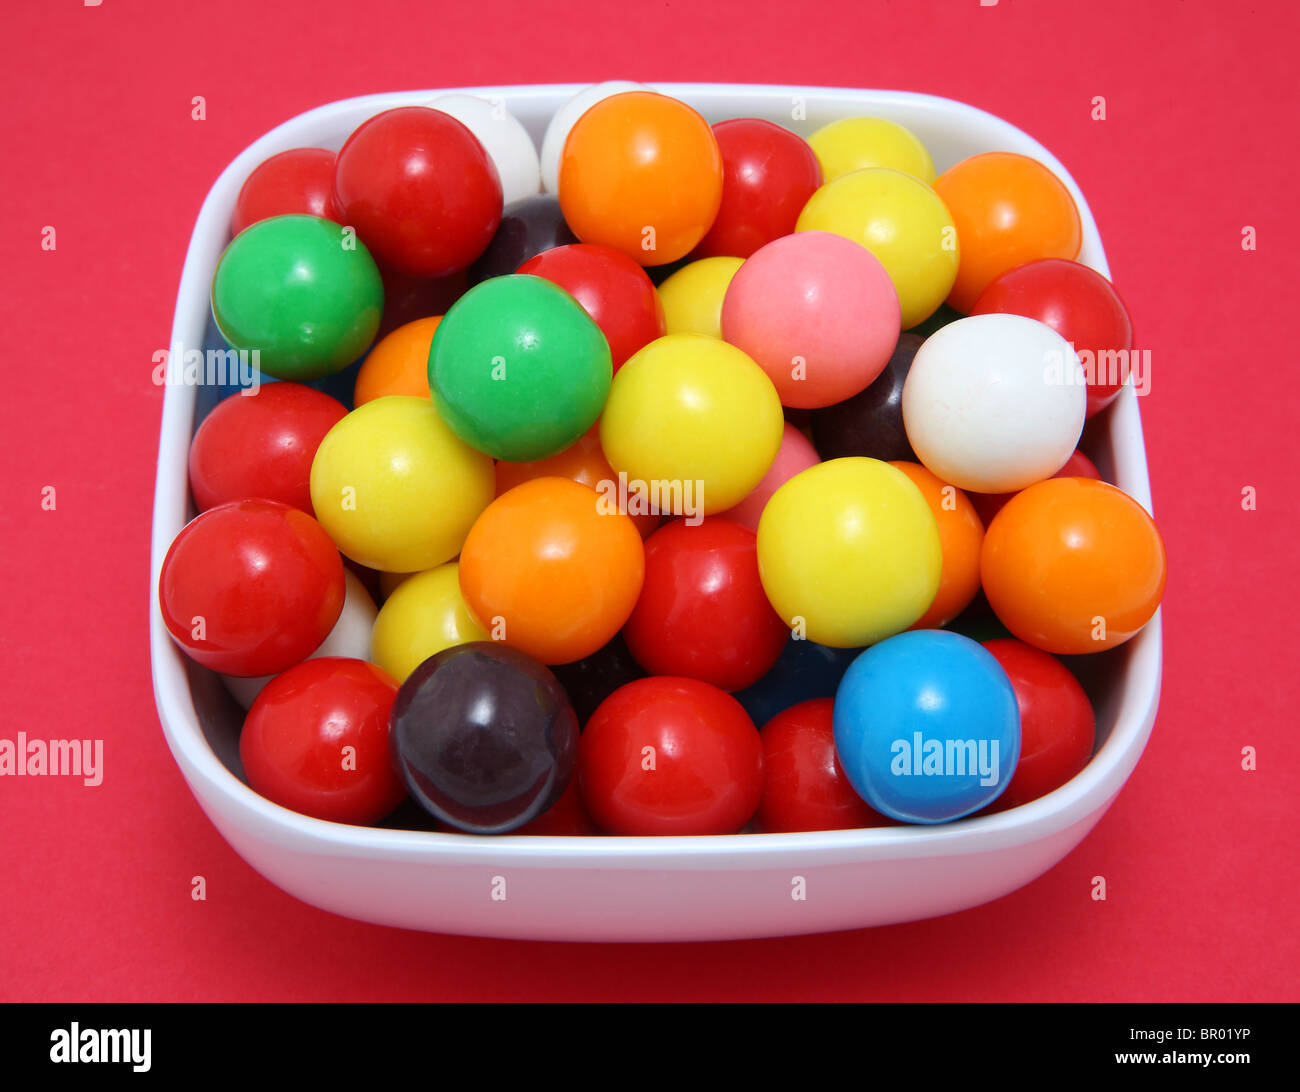 Colorful gumball candy in white bowl on red surface Stock Photo